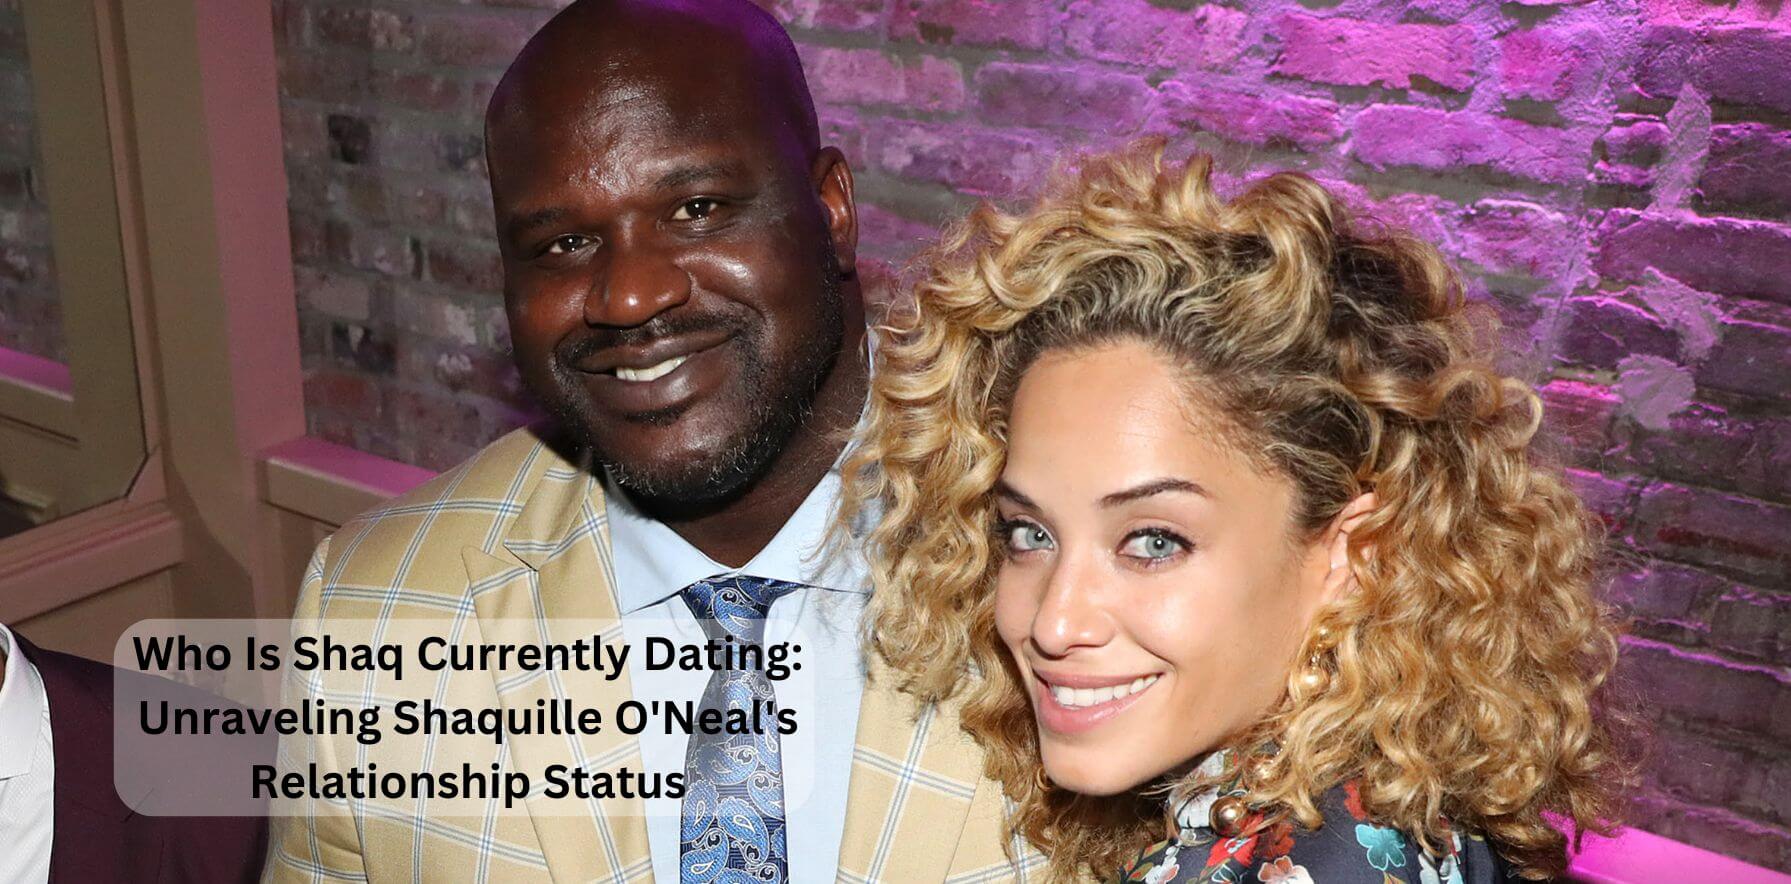 Who Is Shaq Currently Dating: Unraveling Shaquille O'Neal's Relationship Status